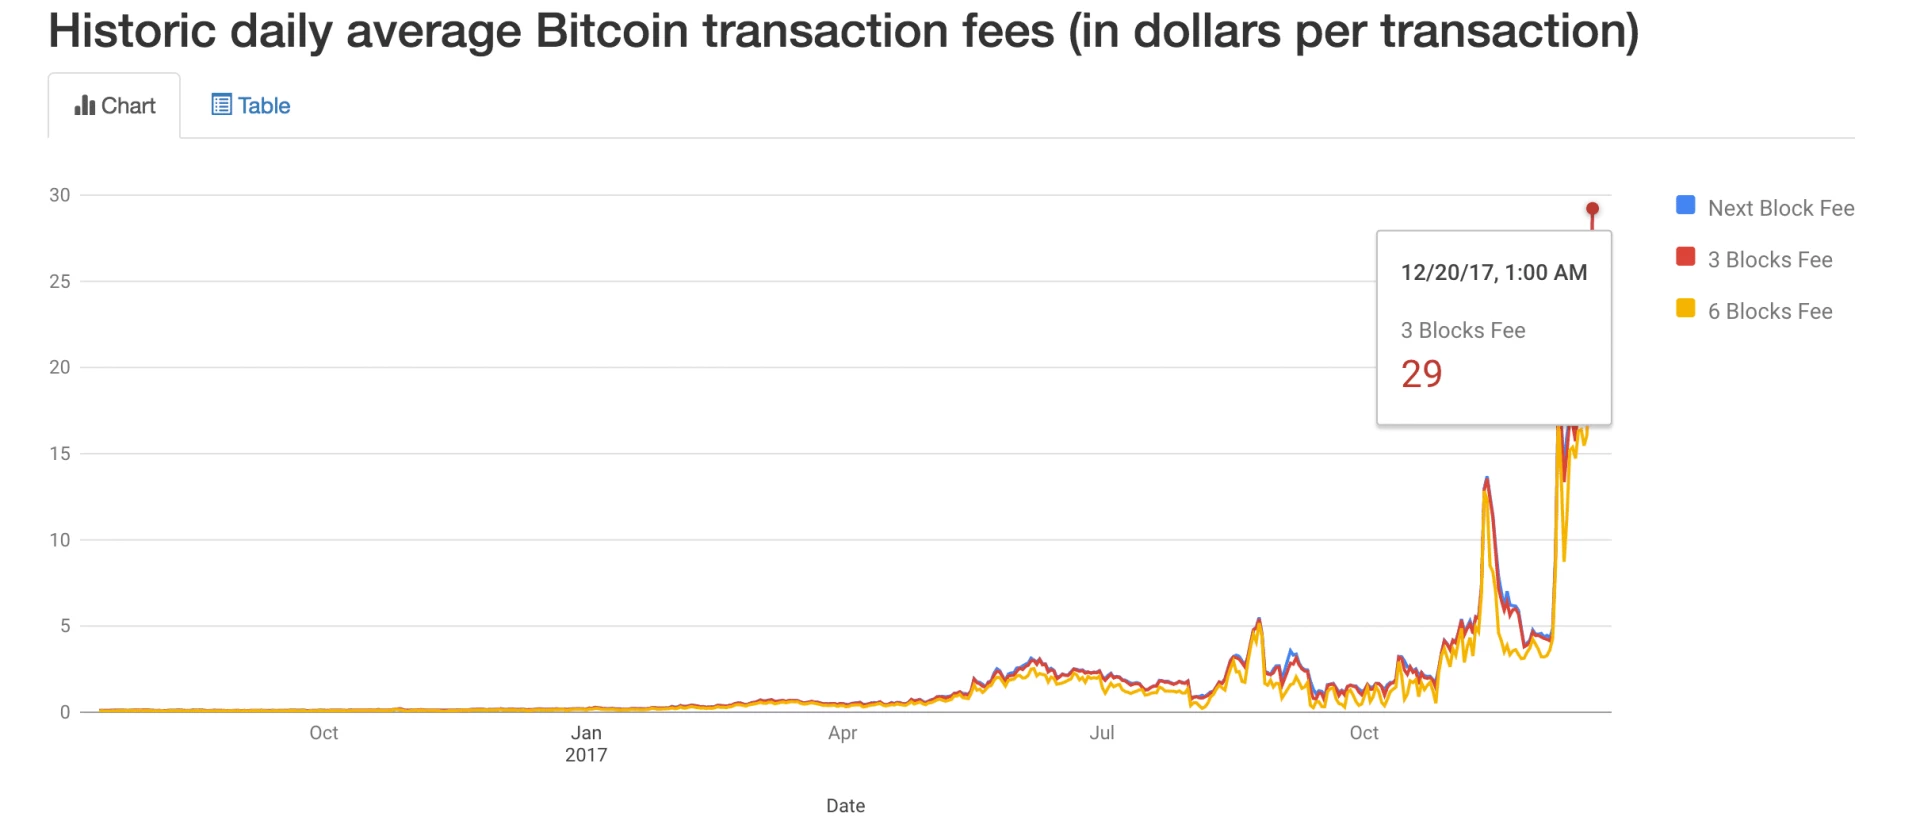 What You Need To Know About The Bitcoin Network Fee